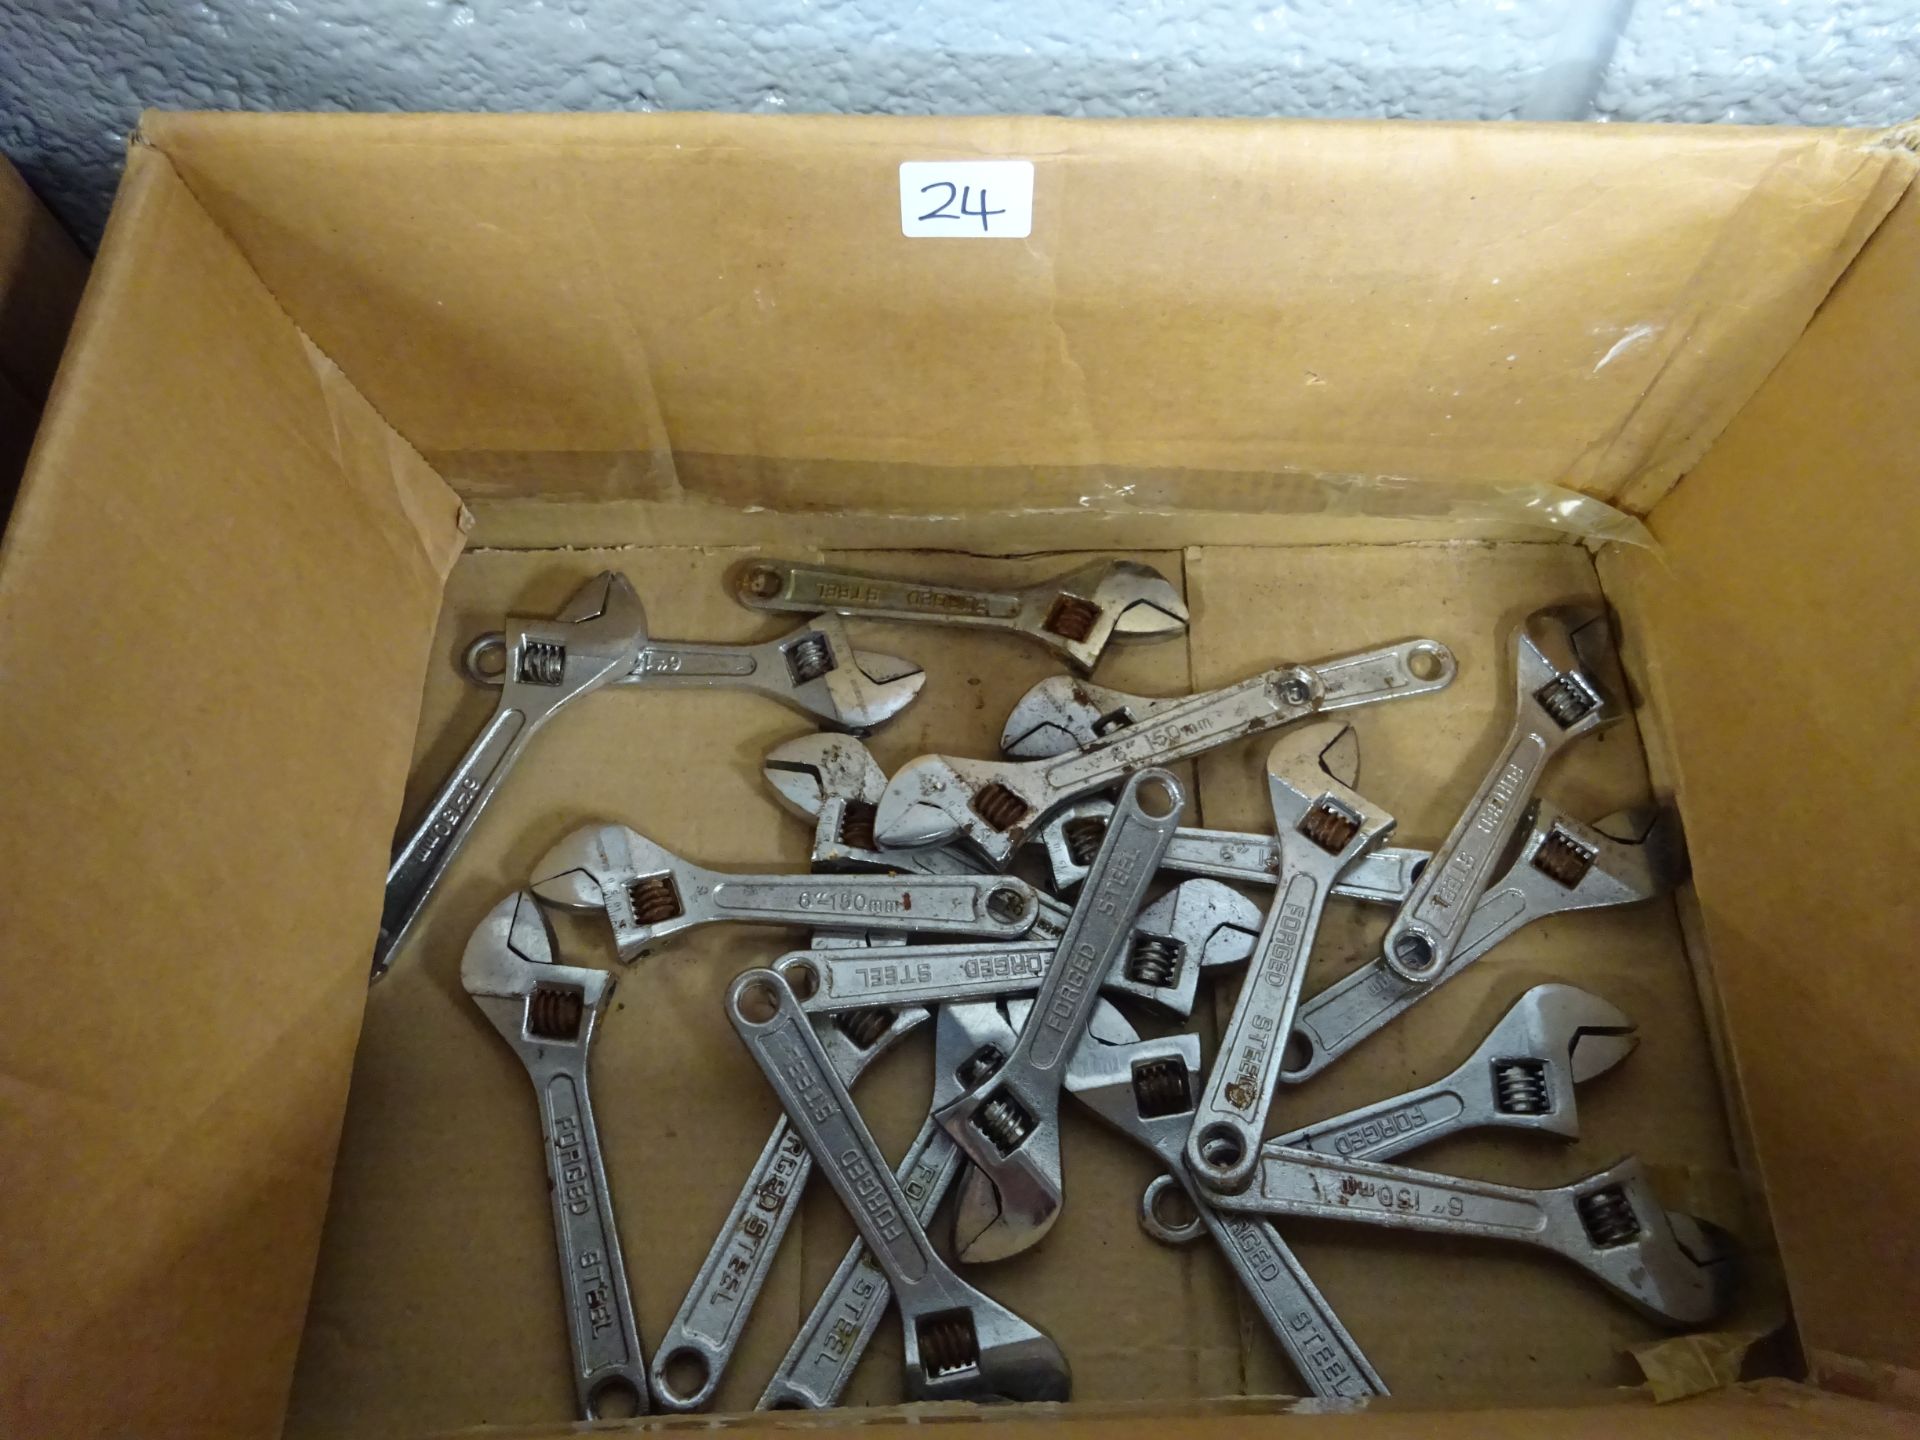 BOX OF 20 SM ADJUSTIBLE SPANNERS